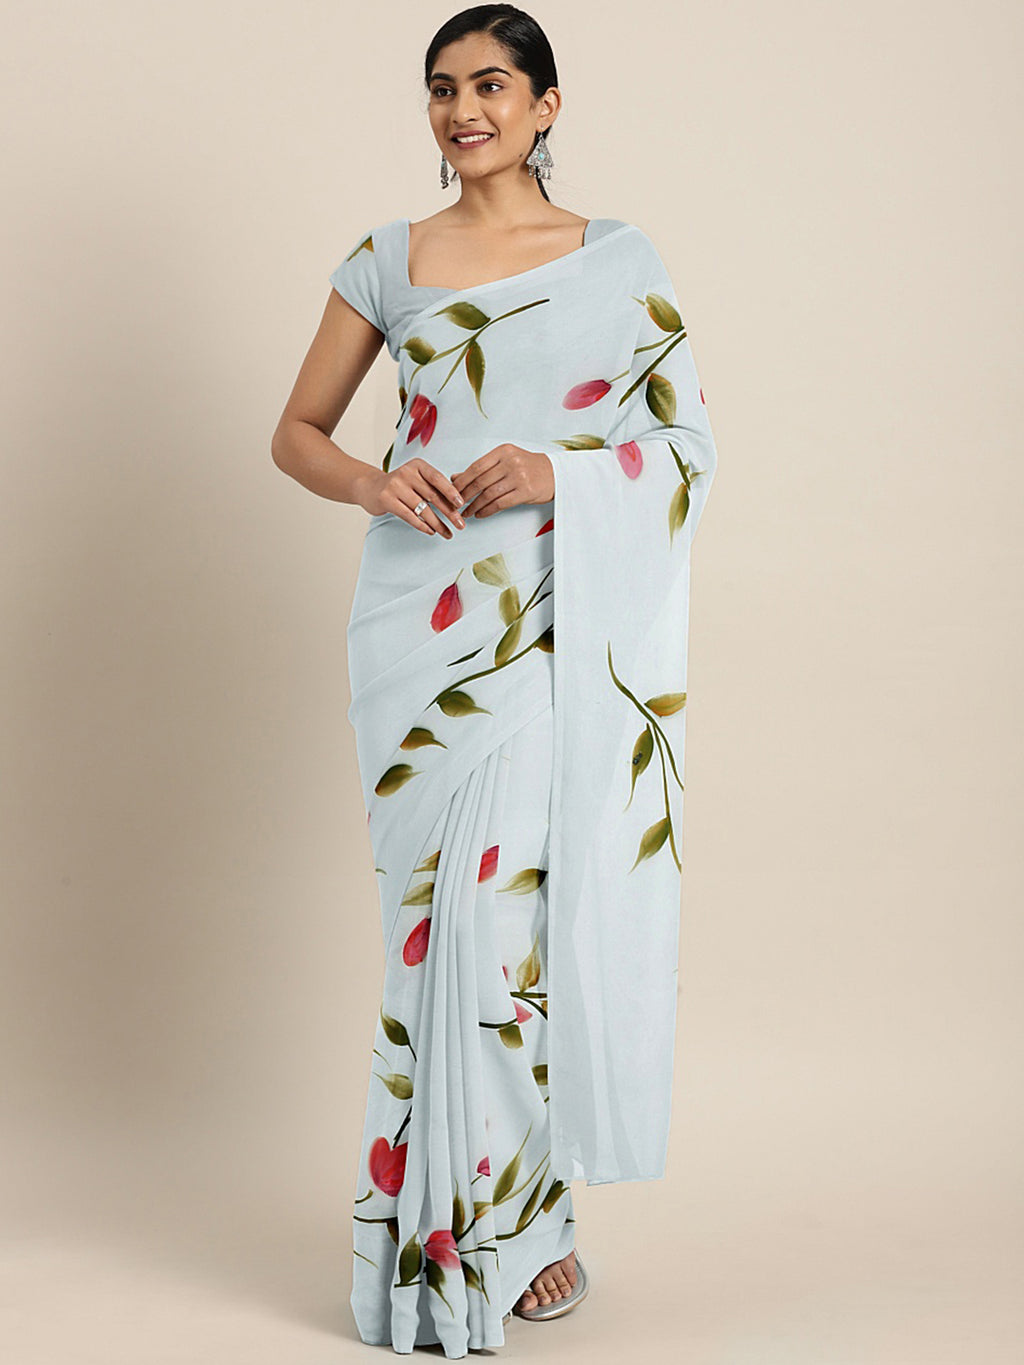 Kalakari India Organza Hand Painted Saree With Blouse BHKPSA0168-Saree-Kalakari India-BHKPSA0168-Bollywood, Fashion, Geographical Indication, Hand Crafted, Heritage Prints, Natural Dyes, Organza, Sarees, Sustainable Fabrics, Woven-[Linen,Ethnic,wear,Fashionista,Handloom,Handicraft,Indigo,blockprint,block,print,Cotton,Chanderi,Blue, latest,classy,party,bollywood,trendy,summer,style,traditional,formal,elegant,unique,style,hand,block,print, dabu,booti,gift,present,glamorous,affordable,collectible,S